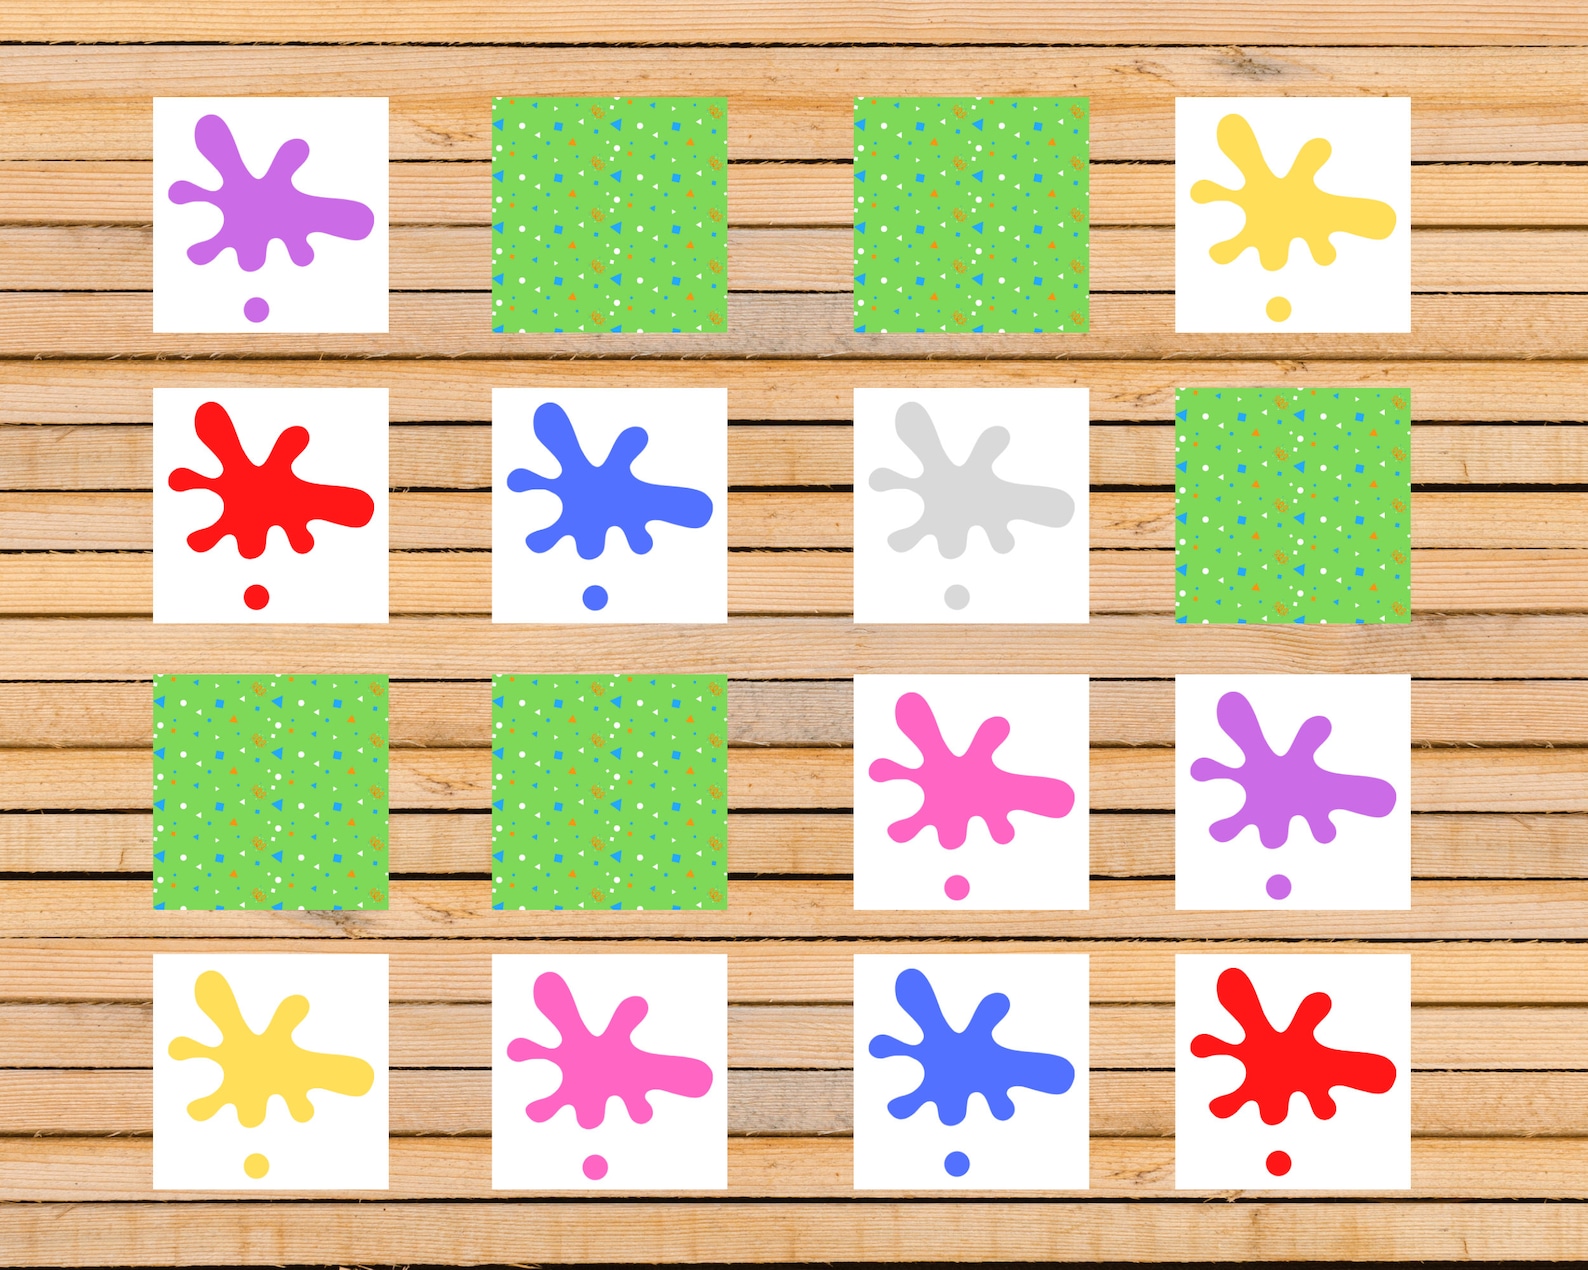 5. "Nail Color Memory Game" - wide 8